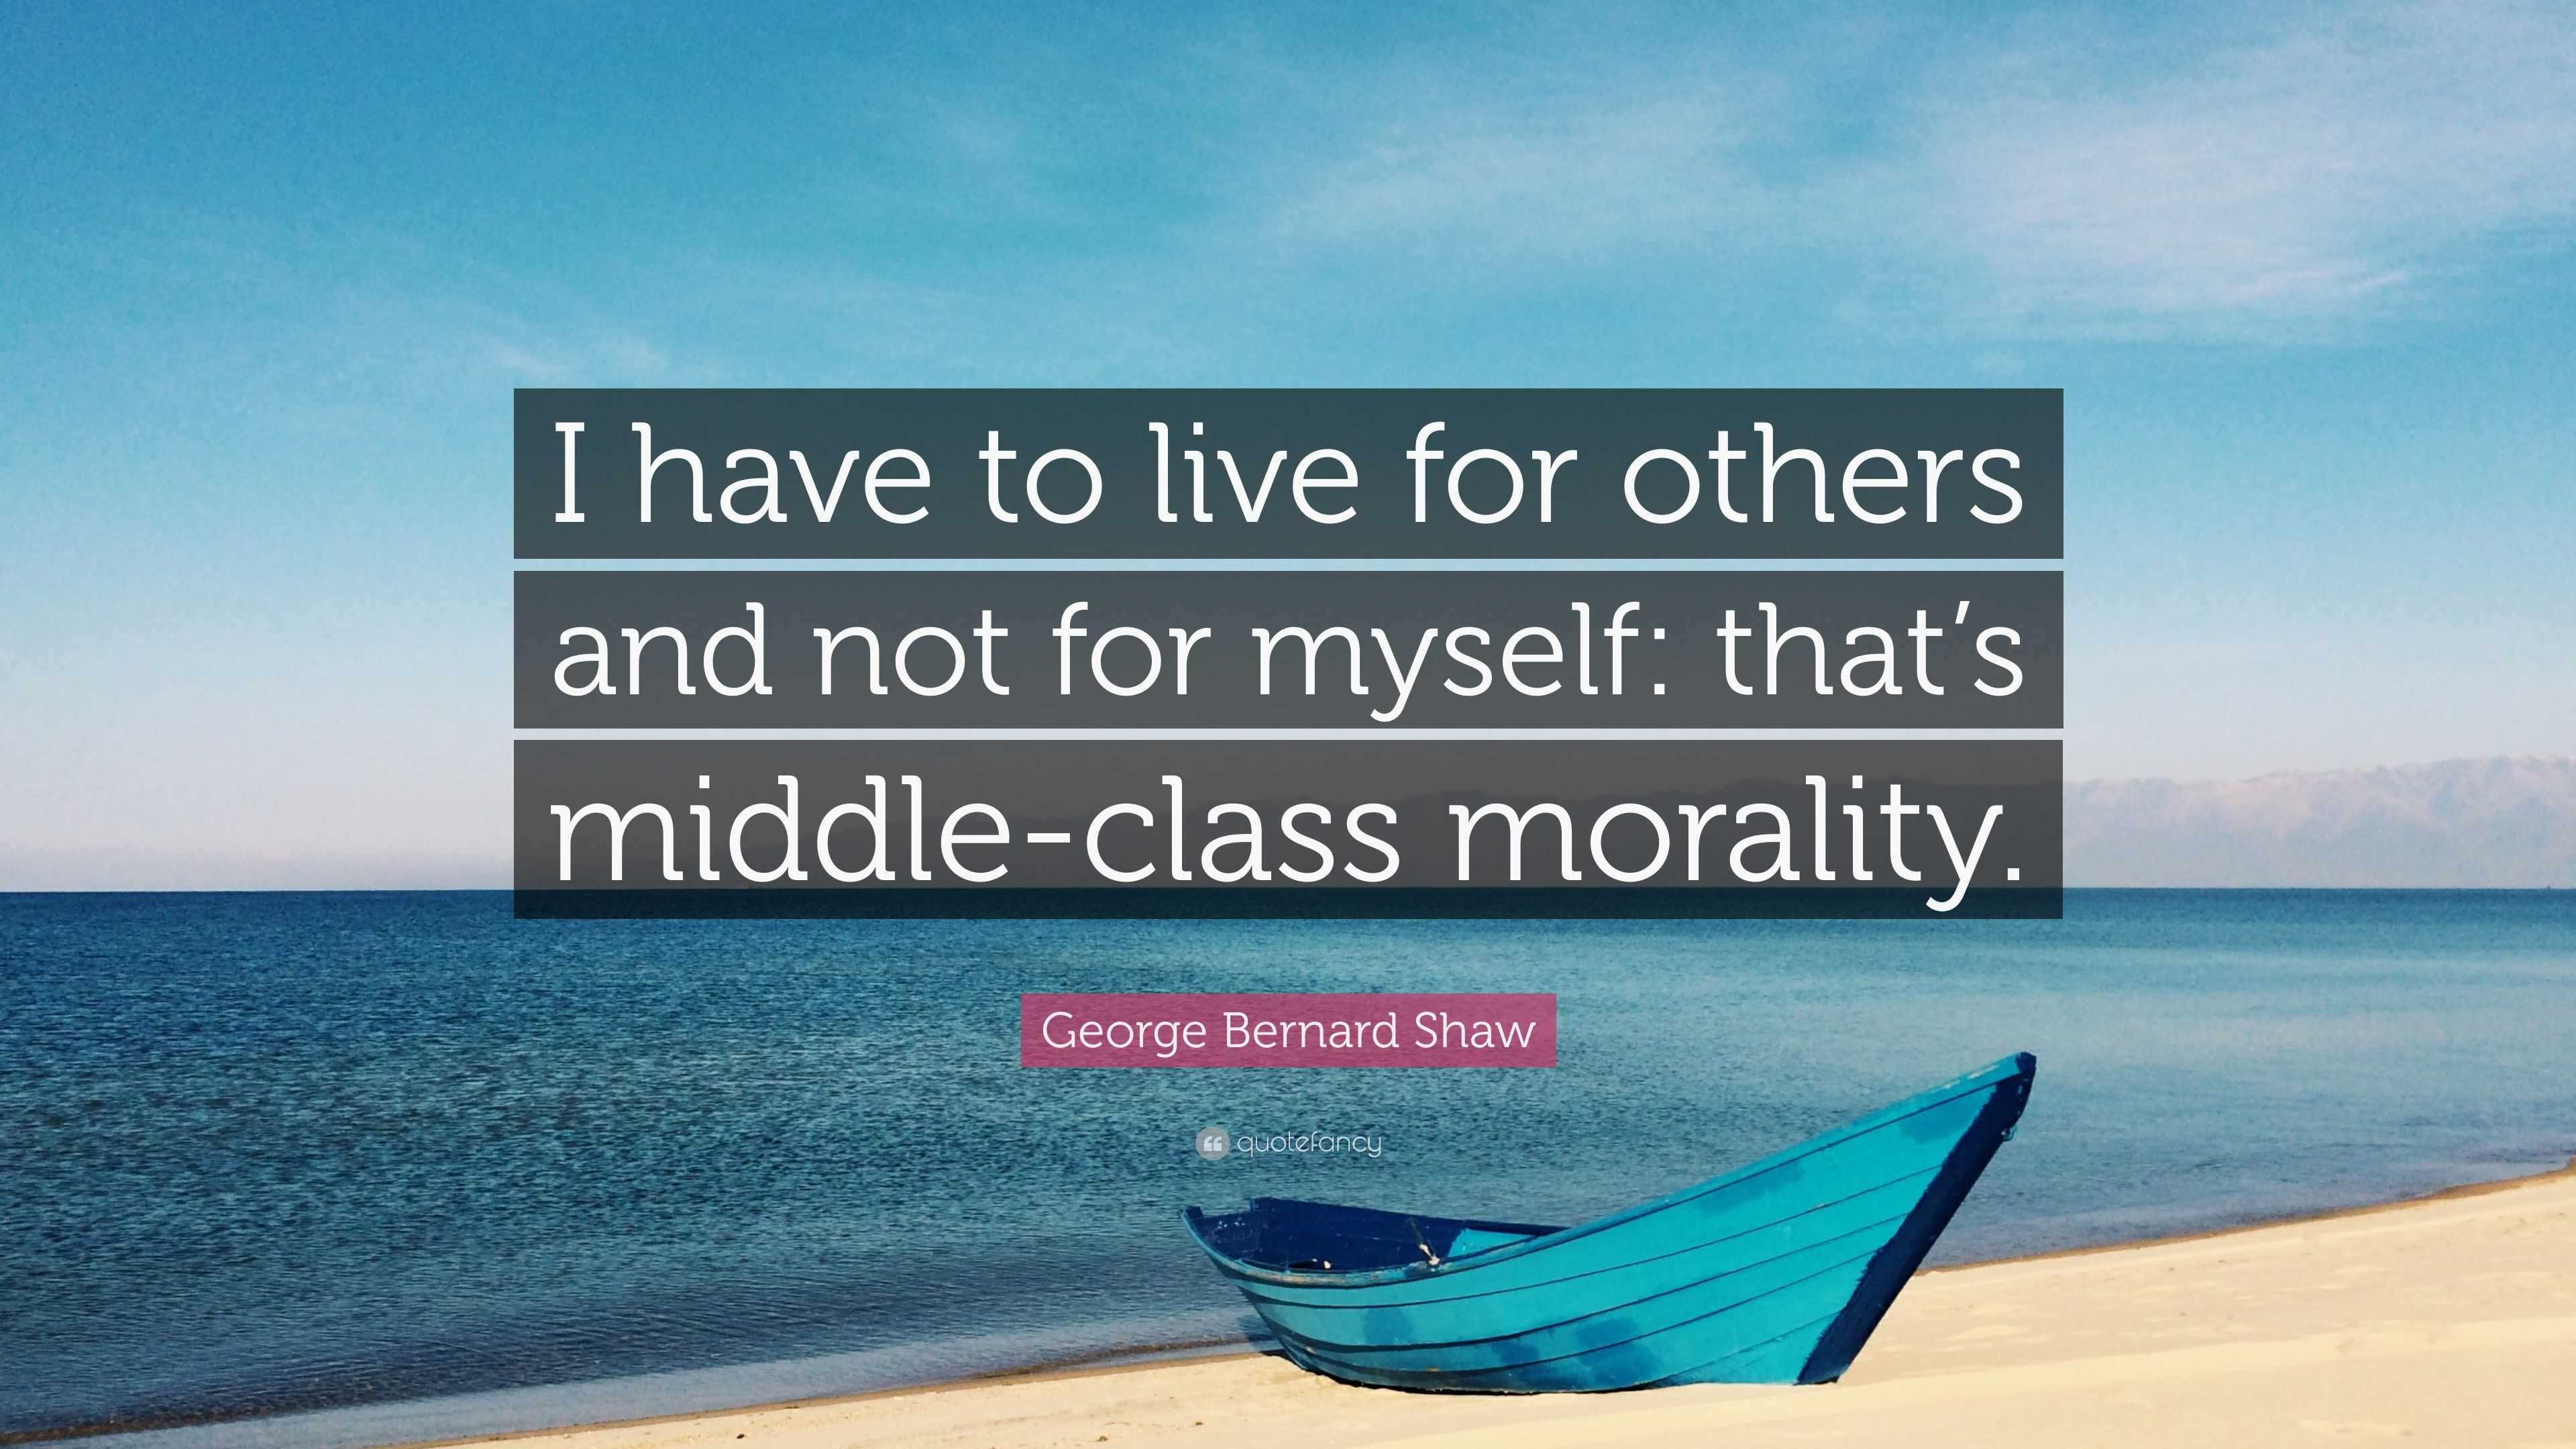 George Bernard Shaw Quote: “I have to live for others and not for ...